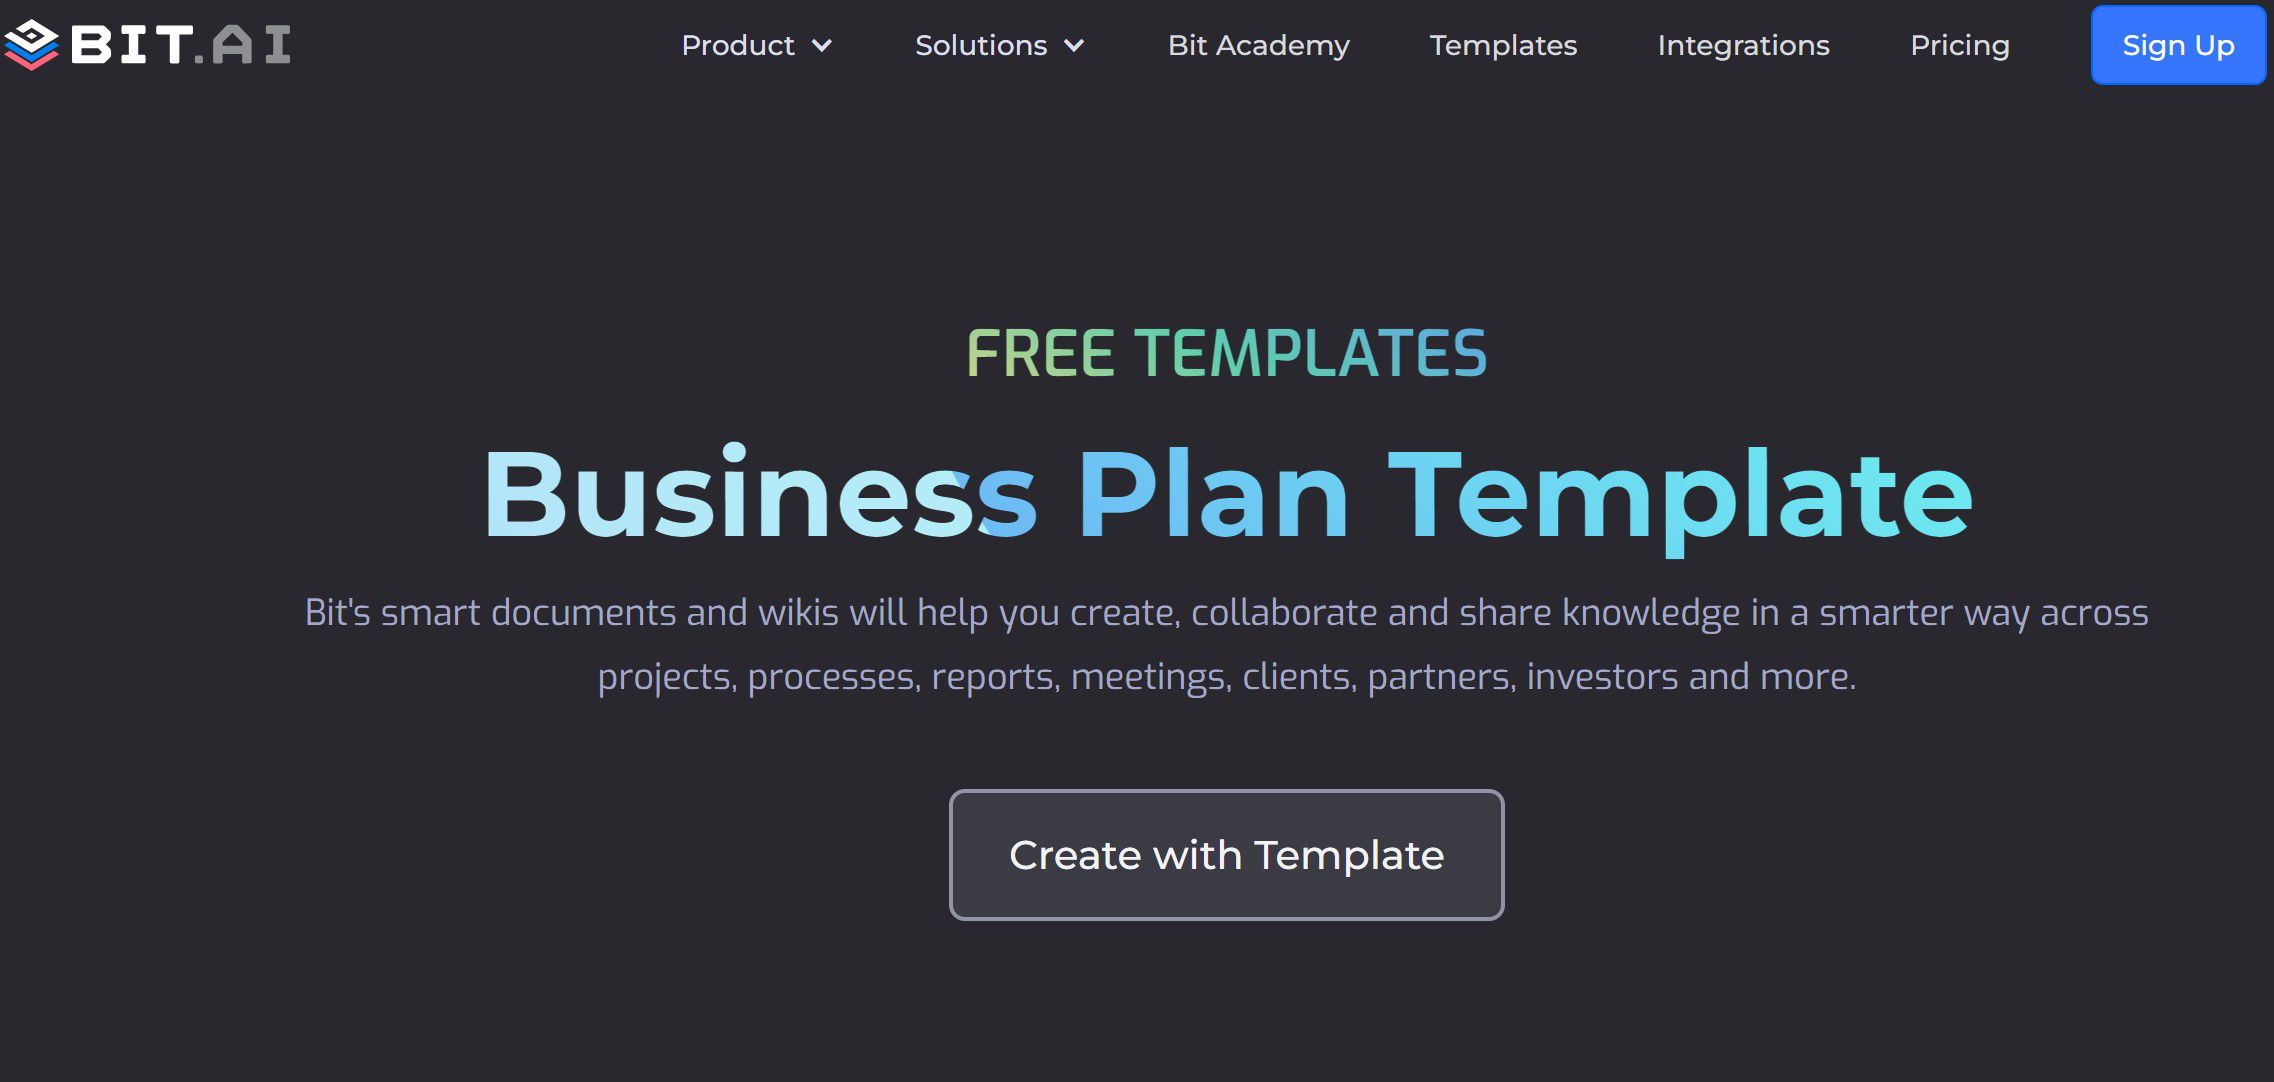 <p>Bit.ai uses a template-based approach for business plan creation. Templates include executive summaries, business proposals, competitor research, pitching, and SWOT analysis.</p><p>Bit.ai is powered by various AI models, allowing it to perform tasks like creating content, drafting charts, and helping teams coordinate. Bit’s Smart Spaces also support collaboration through features like version control and document sharing and tracking.</p><p>Pros:</p><ul><li>More than 100 templates for content creation</li><li>Built-in collaboration tools make it easy to work with colleagues</li><li>Import assets from Google Sheets, Figma, and LucidChart</li><li>Download documents in multiple formats, including PDFs and Word documents</li><li>Create responsive business plan documents</li><li>Track how potential investors and partners interact with the business plan</li></ul><p>Cons:</p><ul><li>Getting used to Bit’s workspace may take time, especially for beginners</li><li>Upgrade to higher plans to access more advanced features</li><li>Limited design options</li></ul><p>Pricing:</p><ul><li>Free plan with limited tier</li><li>Pro plan is $12 per member each month</li><li>Business edition for $20 per member each month</li></ul>